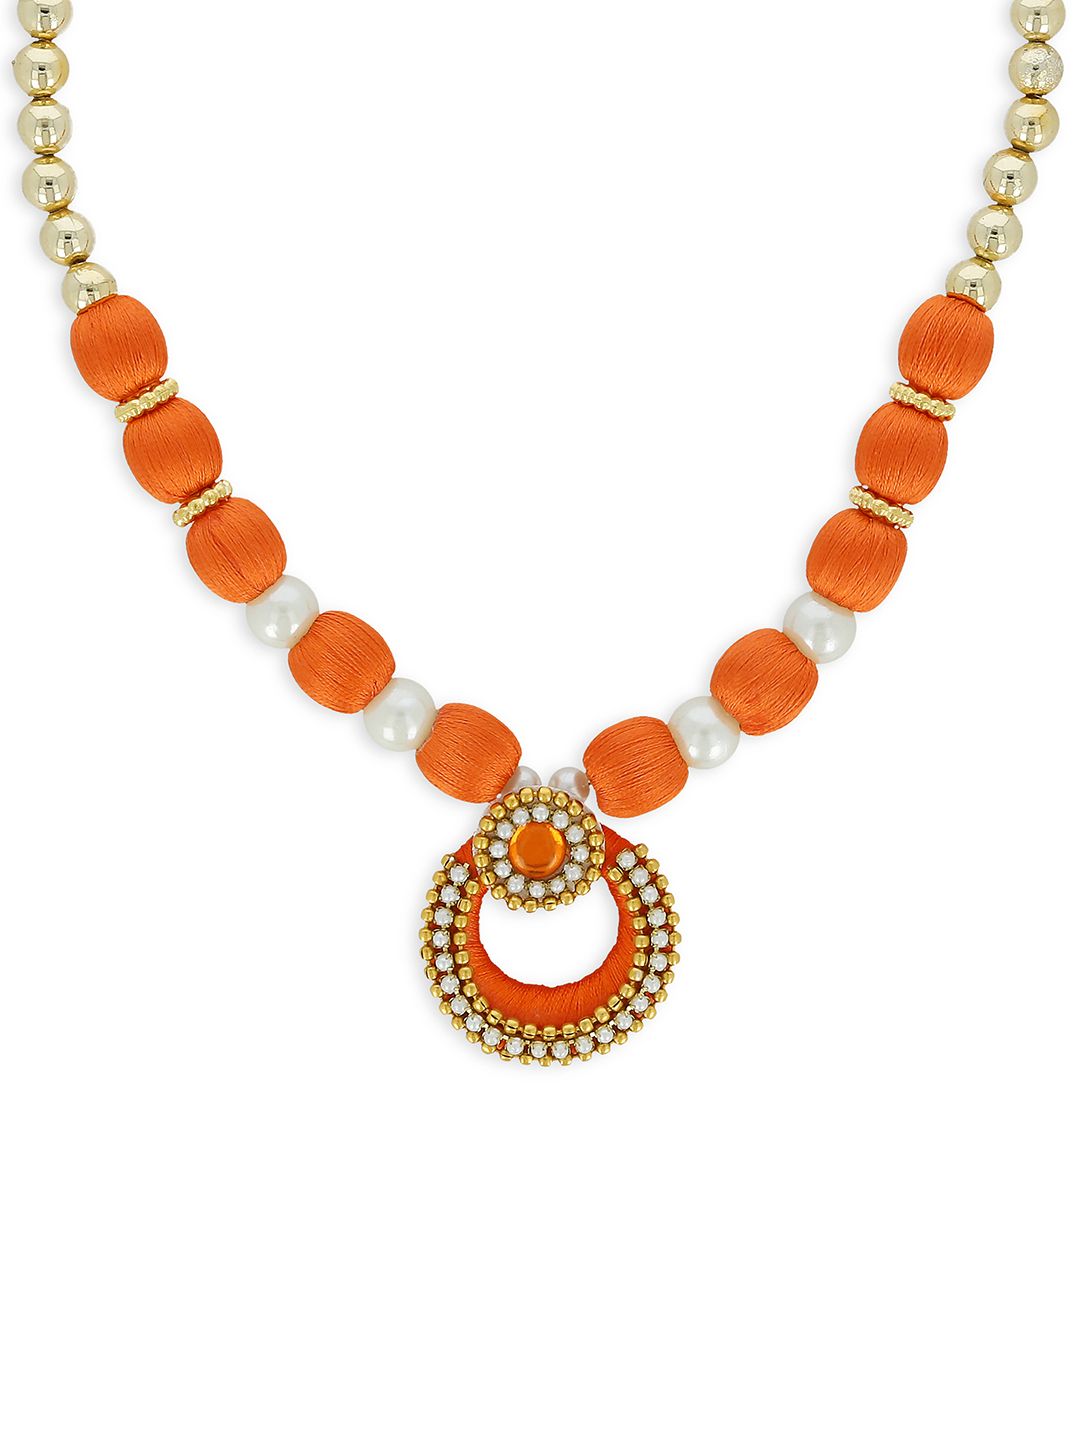 AKSHARA Gold-Toned And Orange Handcrafted Beaded Necklace Price in India